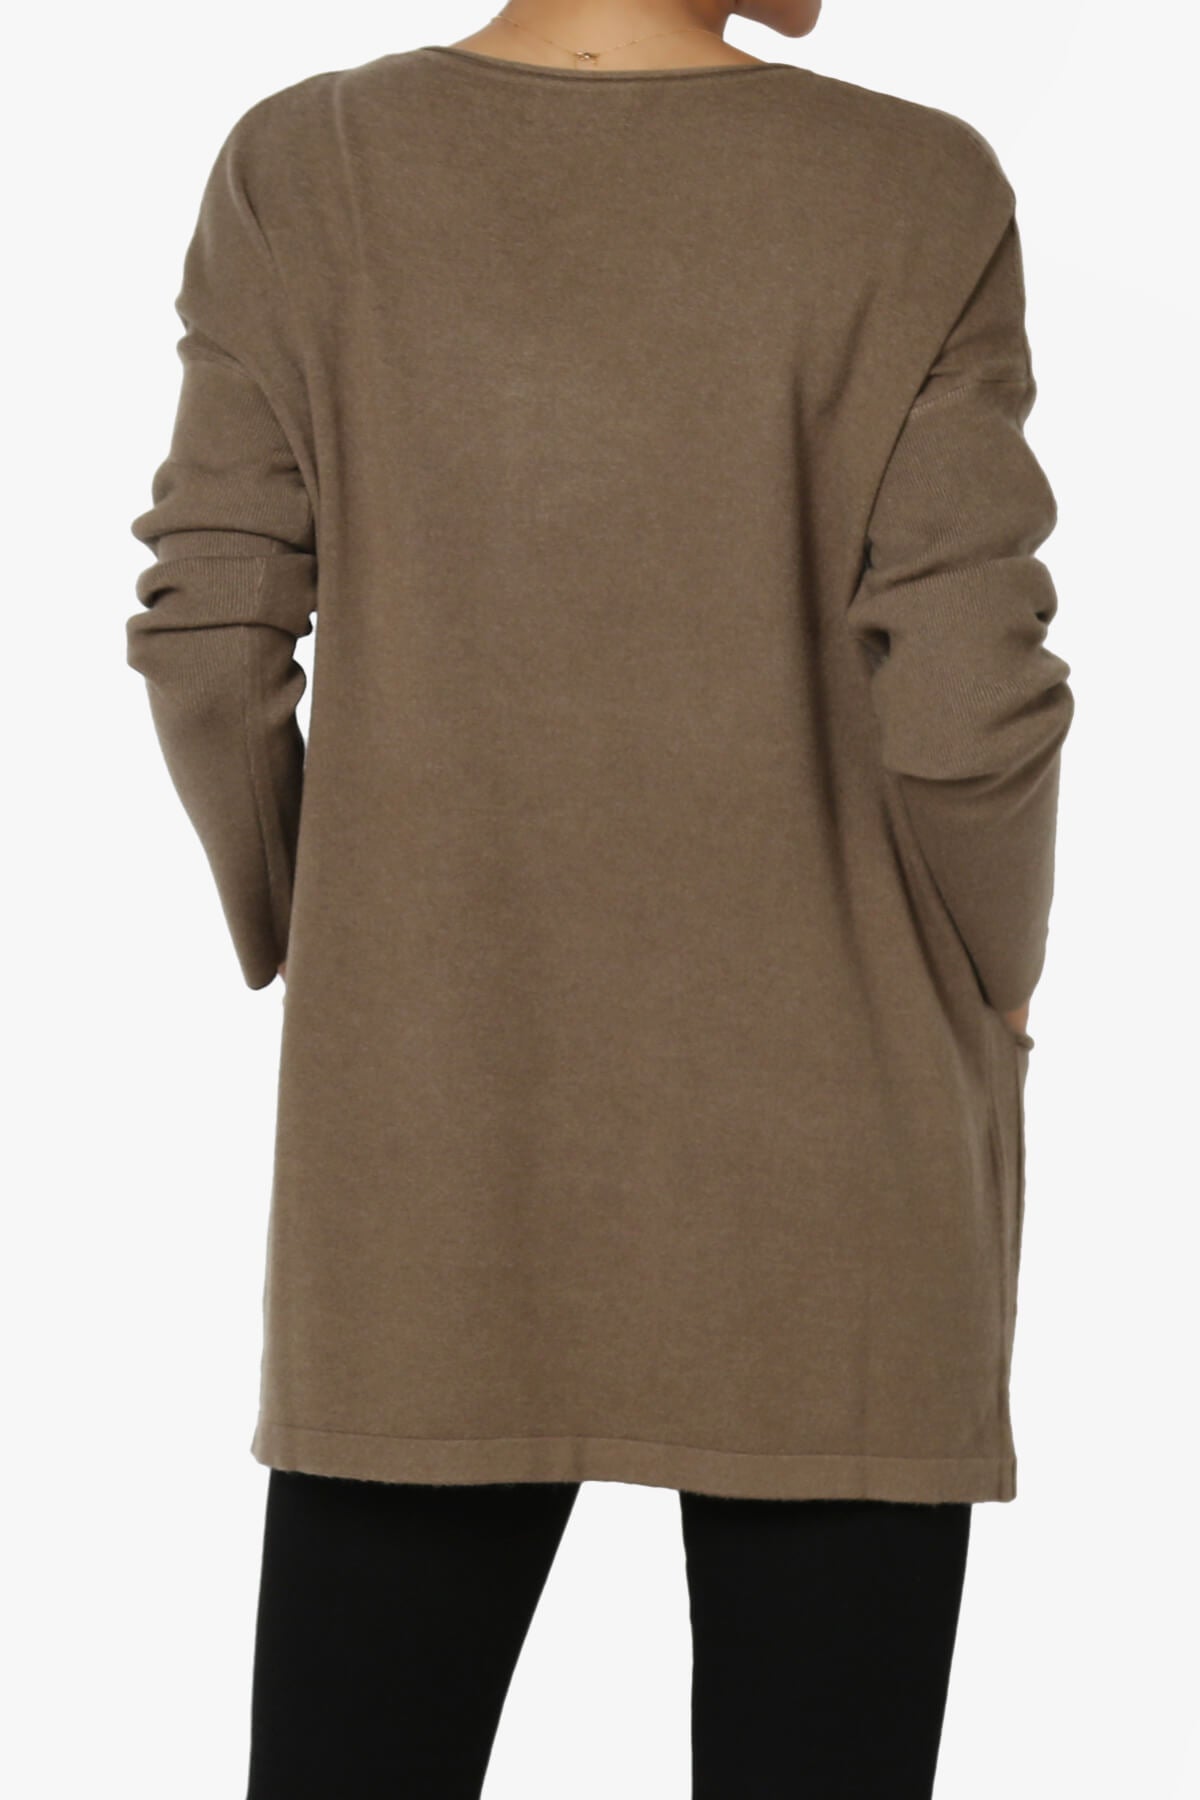 Load image into Gallery viewer, Brecken Pocket Long Sleeve Soft Knit Sweater Tunic MOCHA_2
